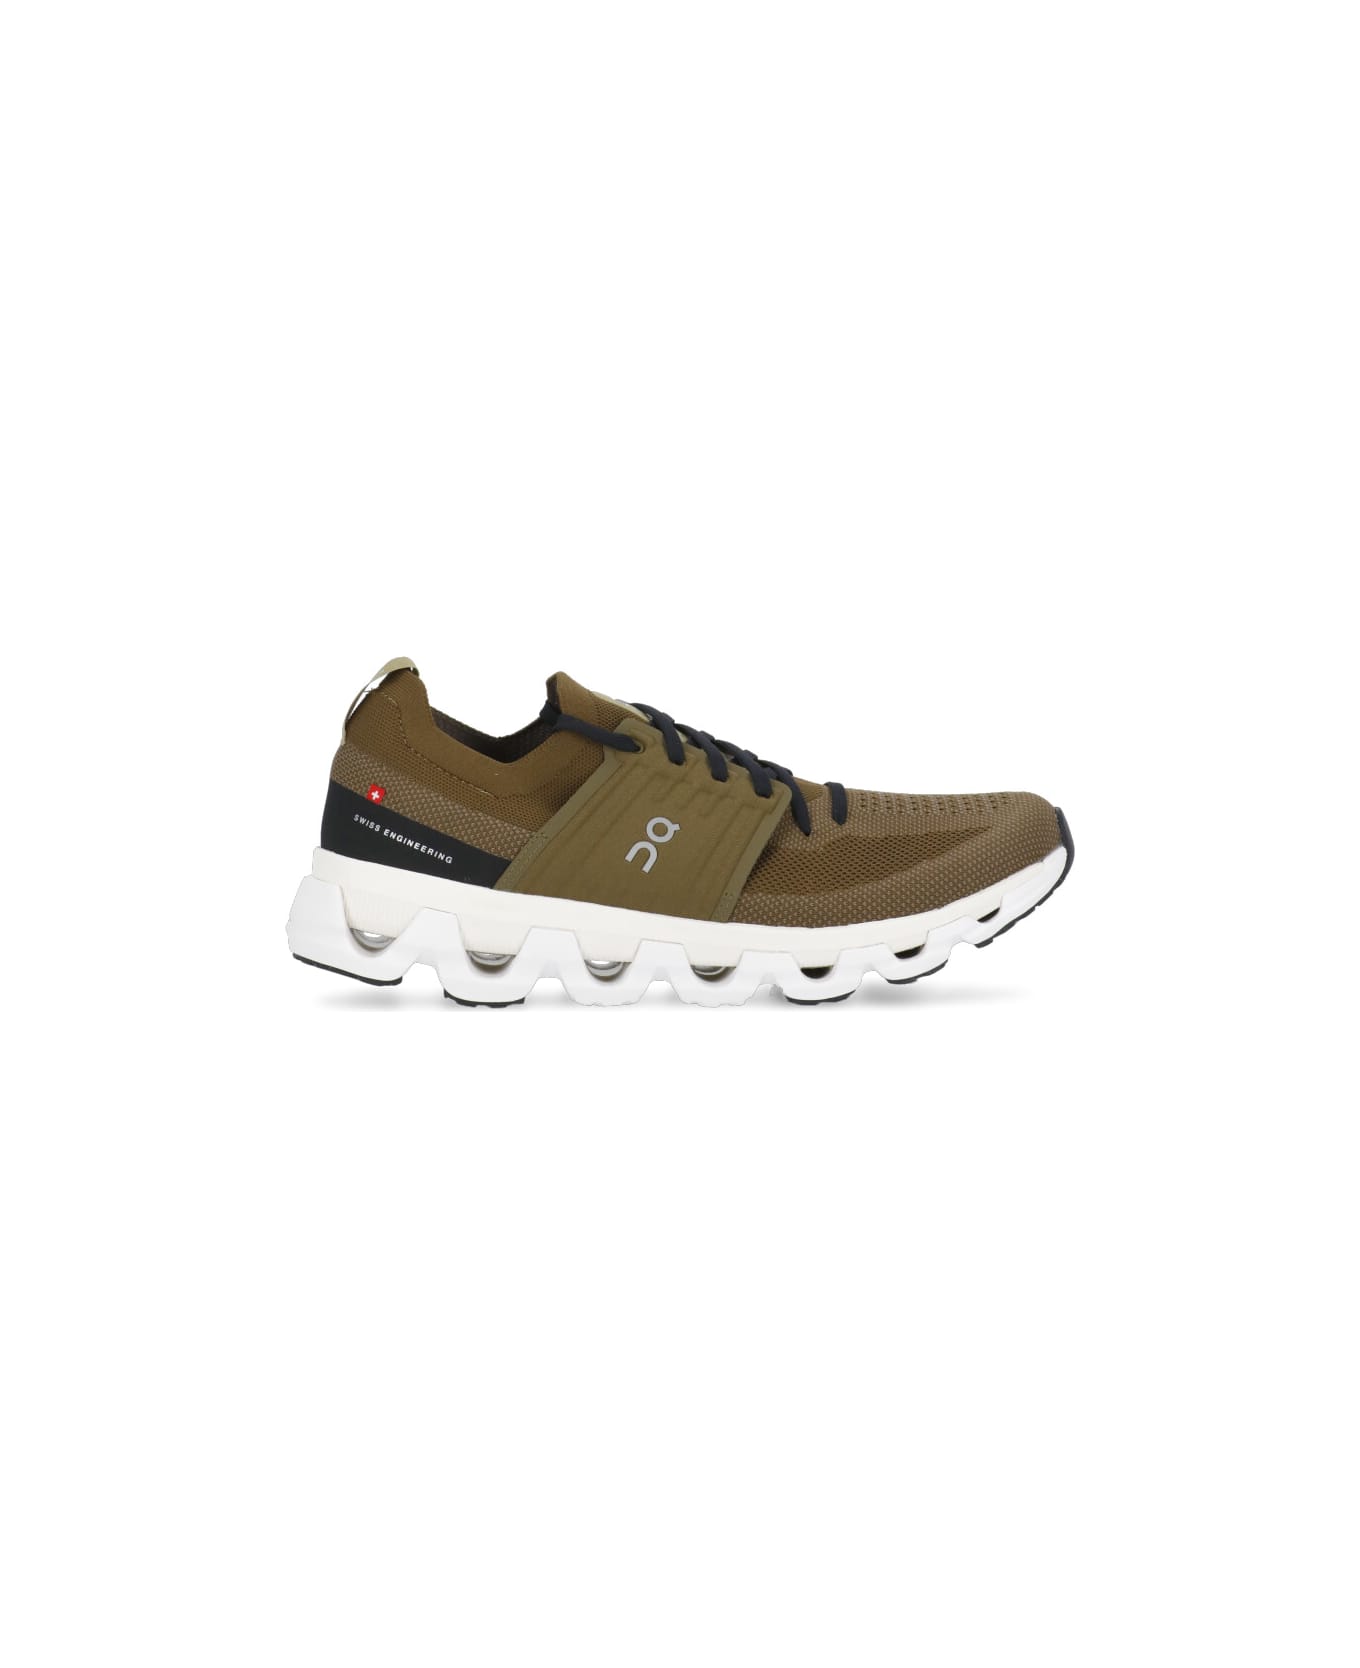 ON Cloudswift 3 Sneakers - Brown